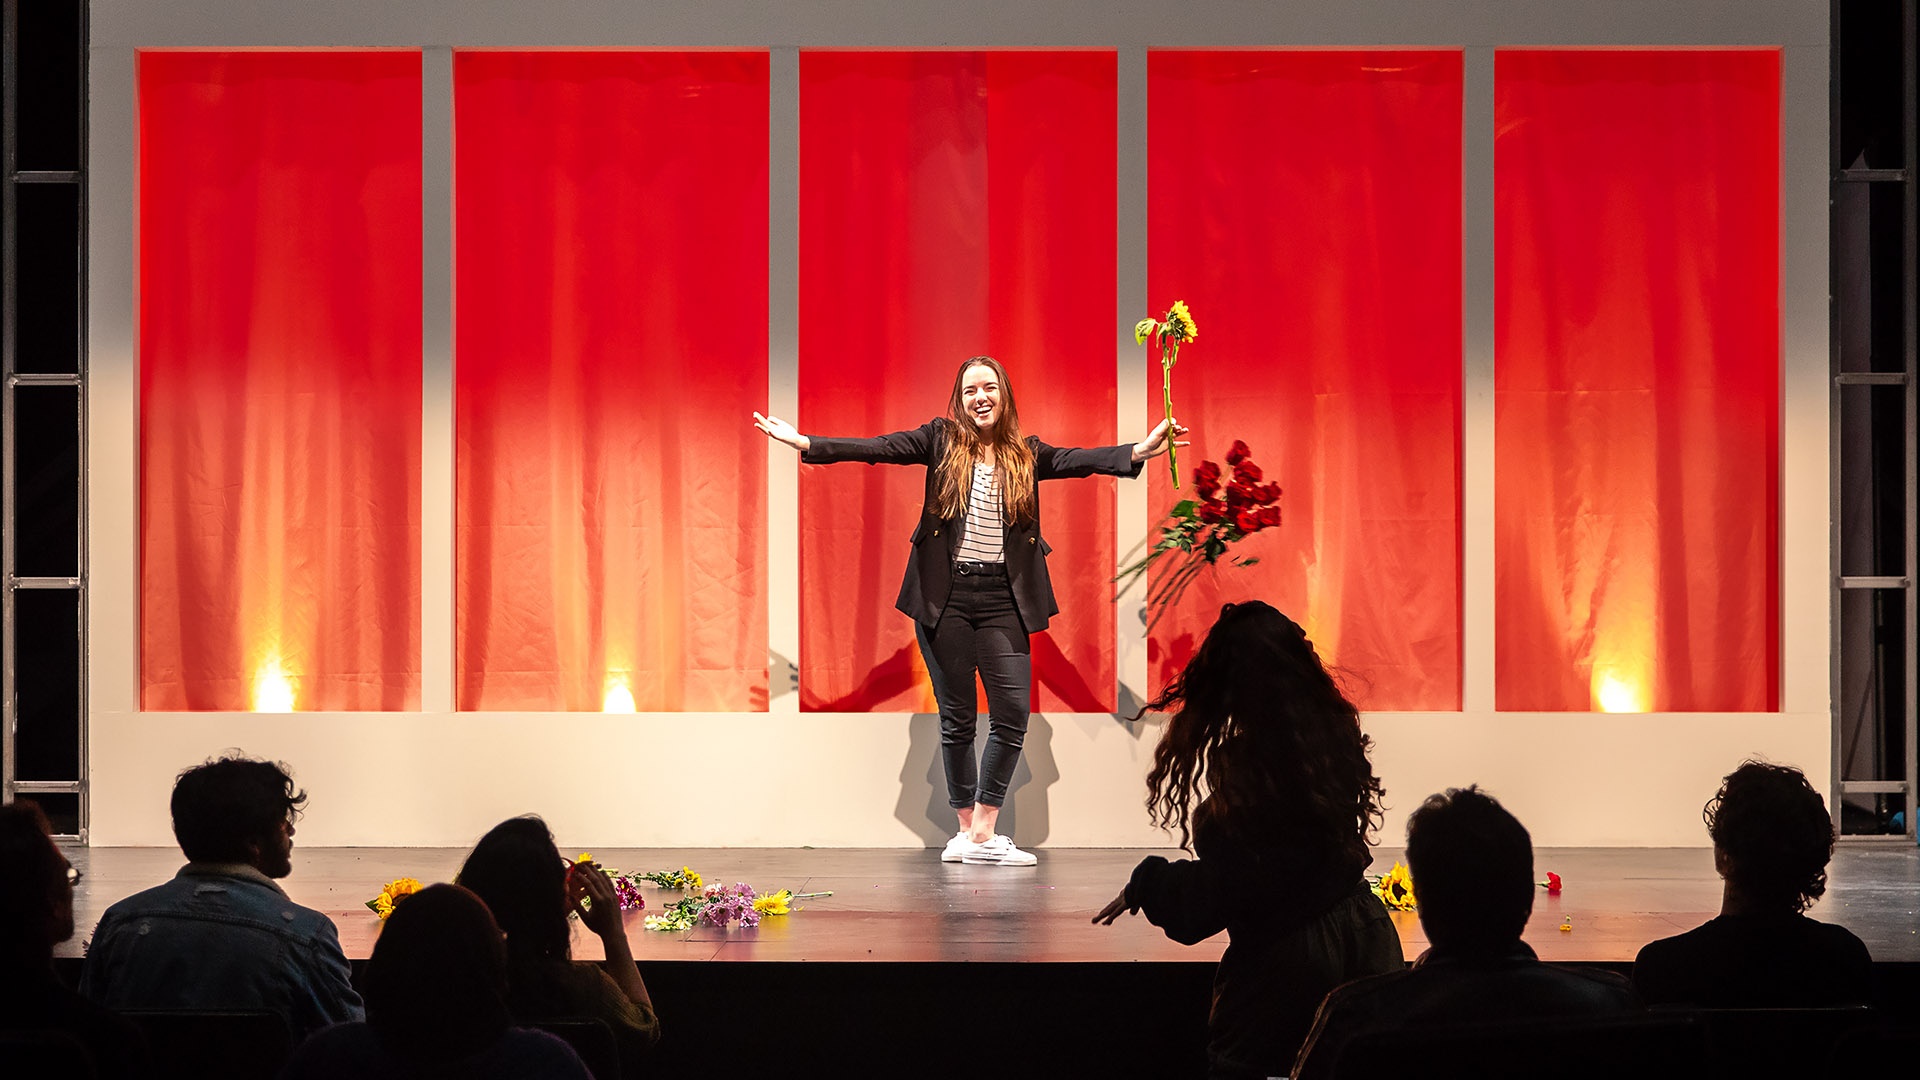 Audience applause for Theater Arts Student's performance